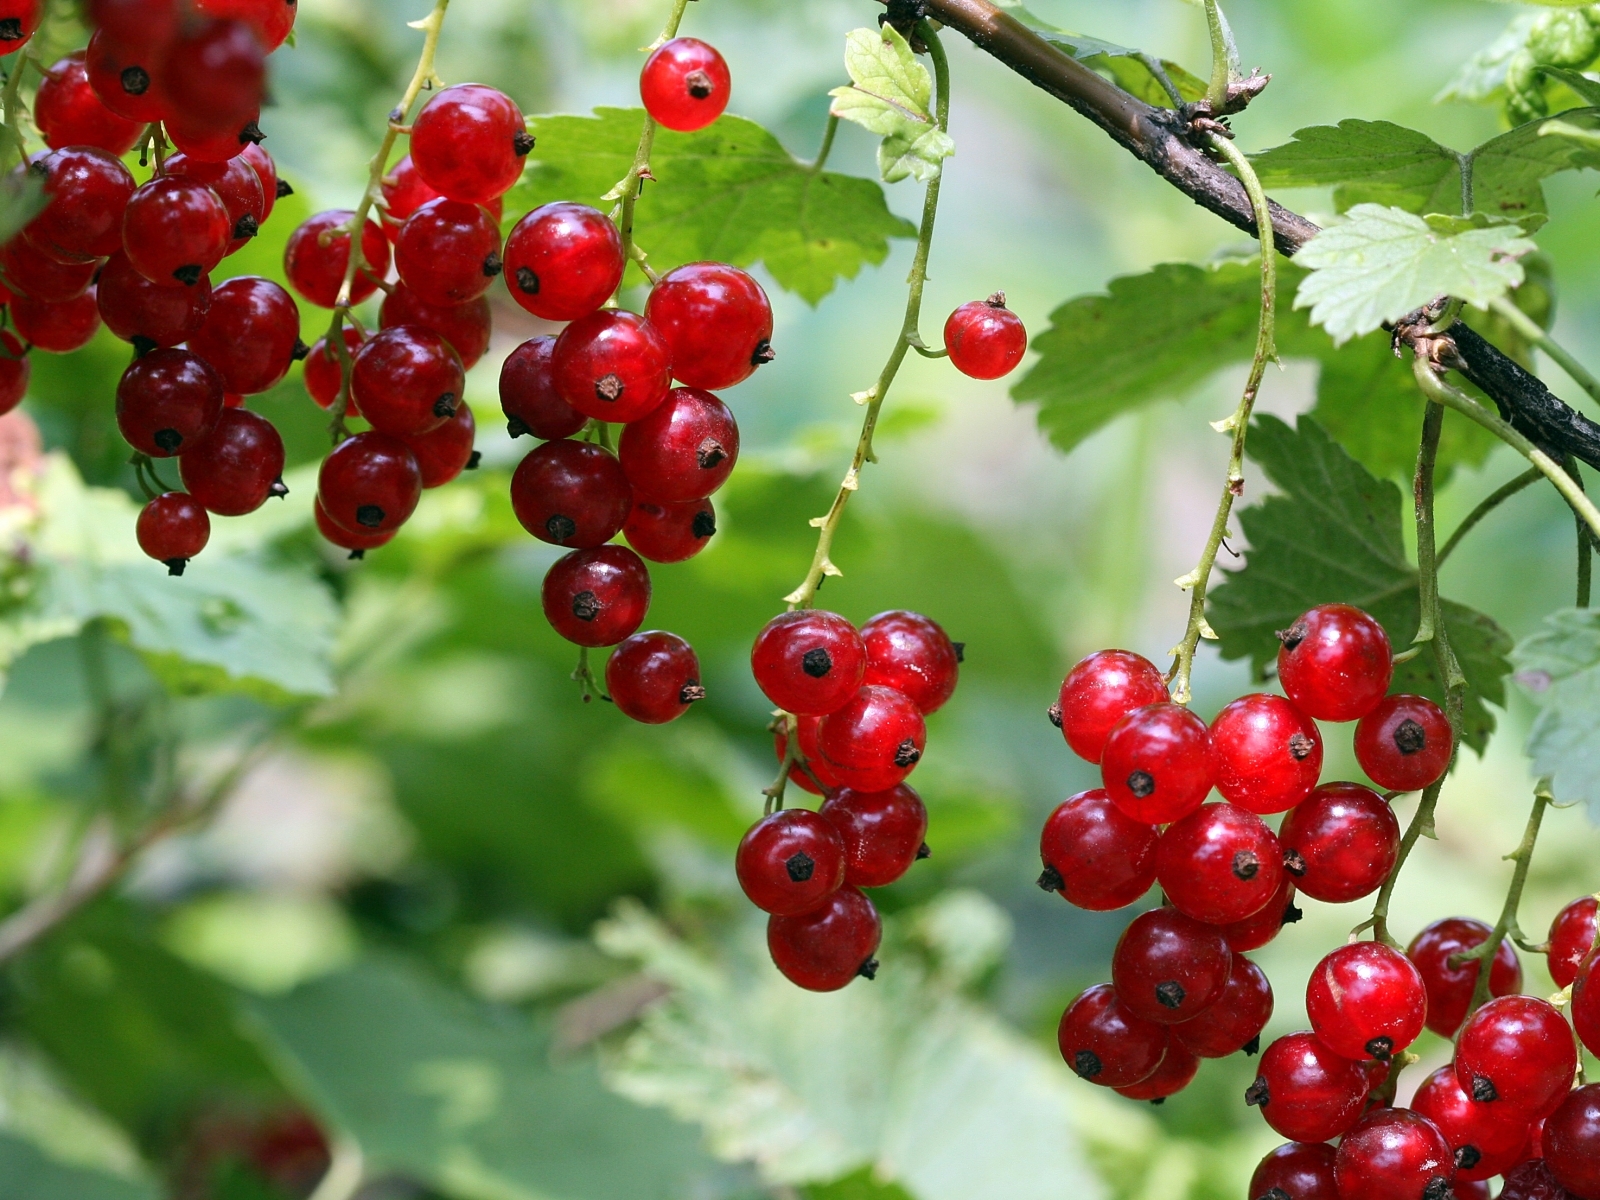 green, plants, fruits, food, berries, currant High Definition image